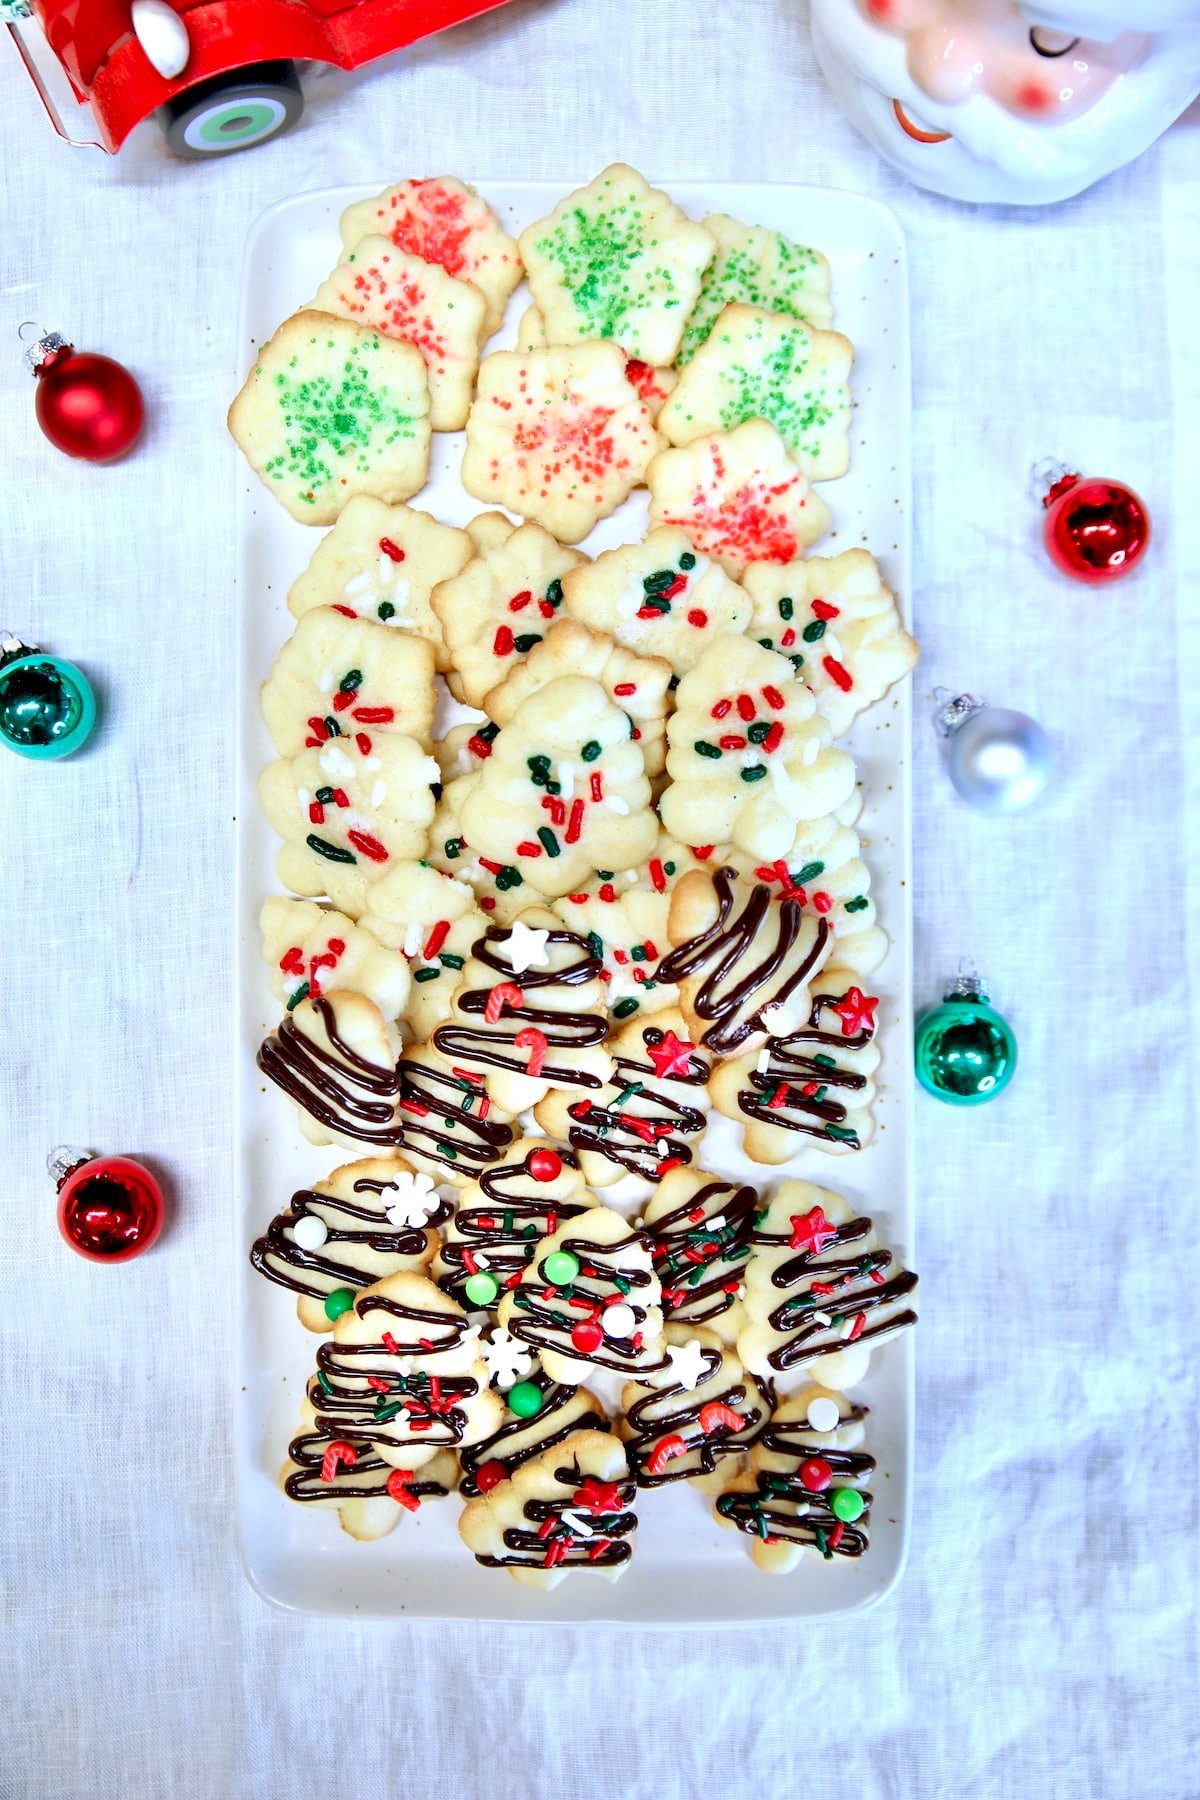 Tray of decorated spritz cookies.